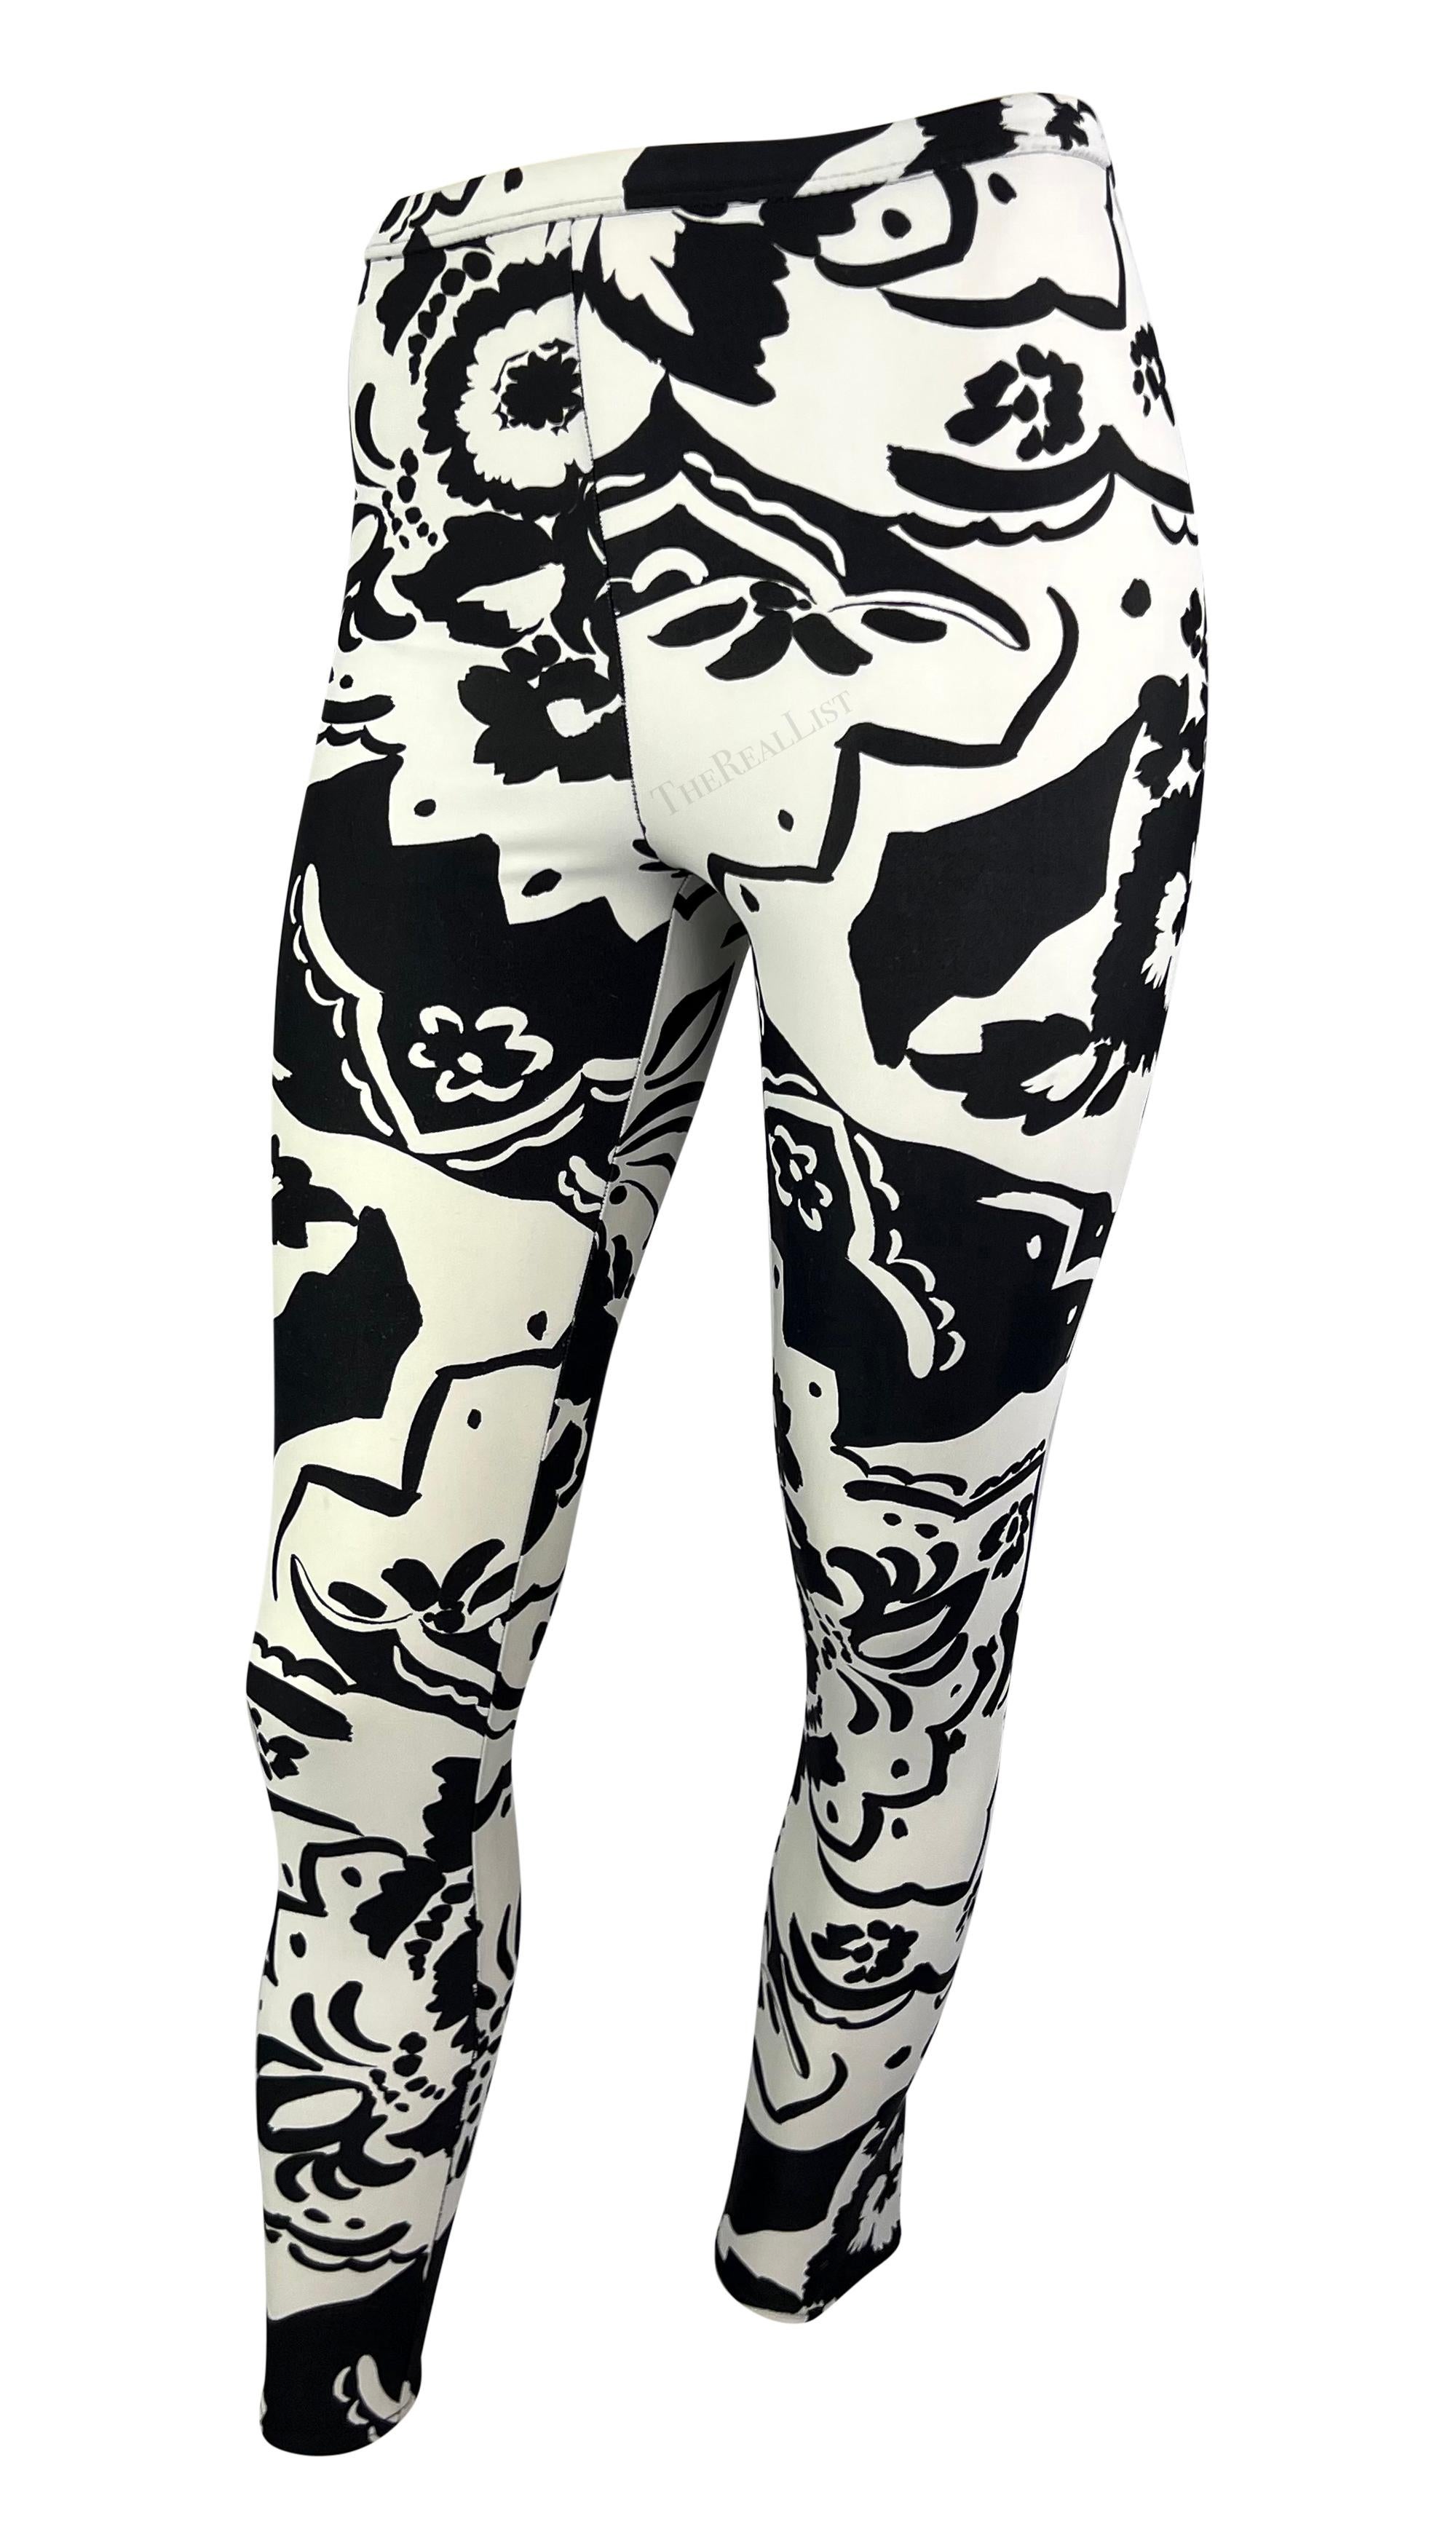 Presenting a pair of black and white floral Gianni Versace tights, designed by Gianni Versace. From 1990, these stretch leggings are covered in a bold abstract floral pattern and feature a high waist. 

Approximate measurements:
Size - IT42
Waist: